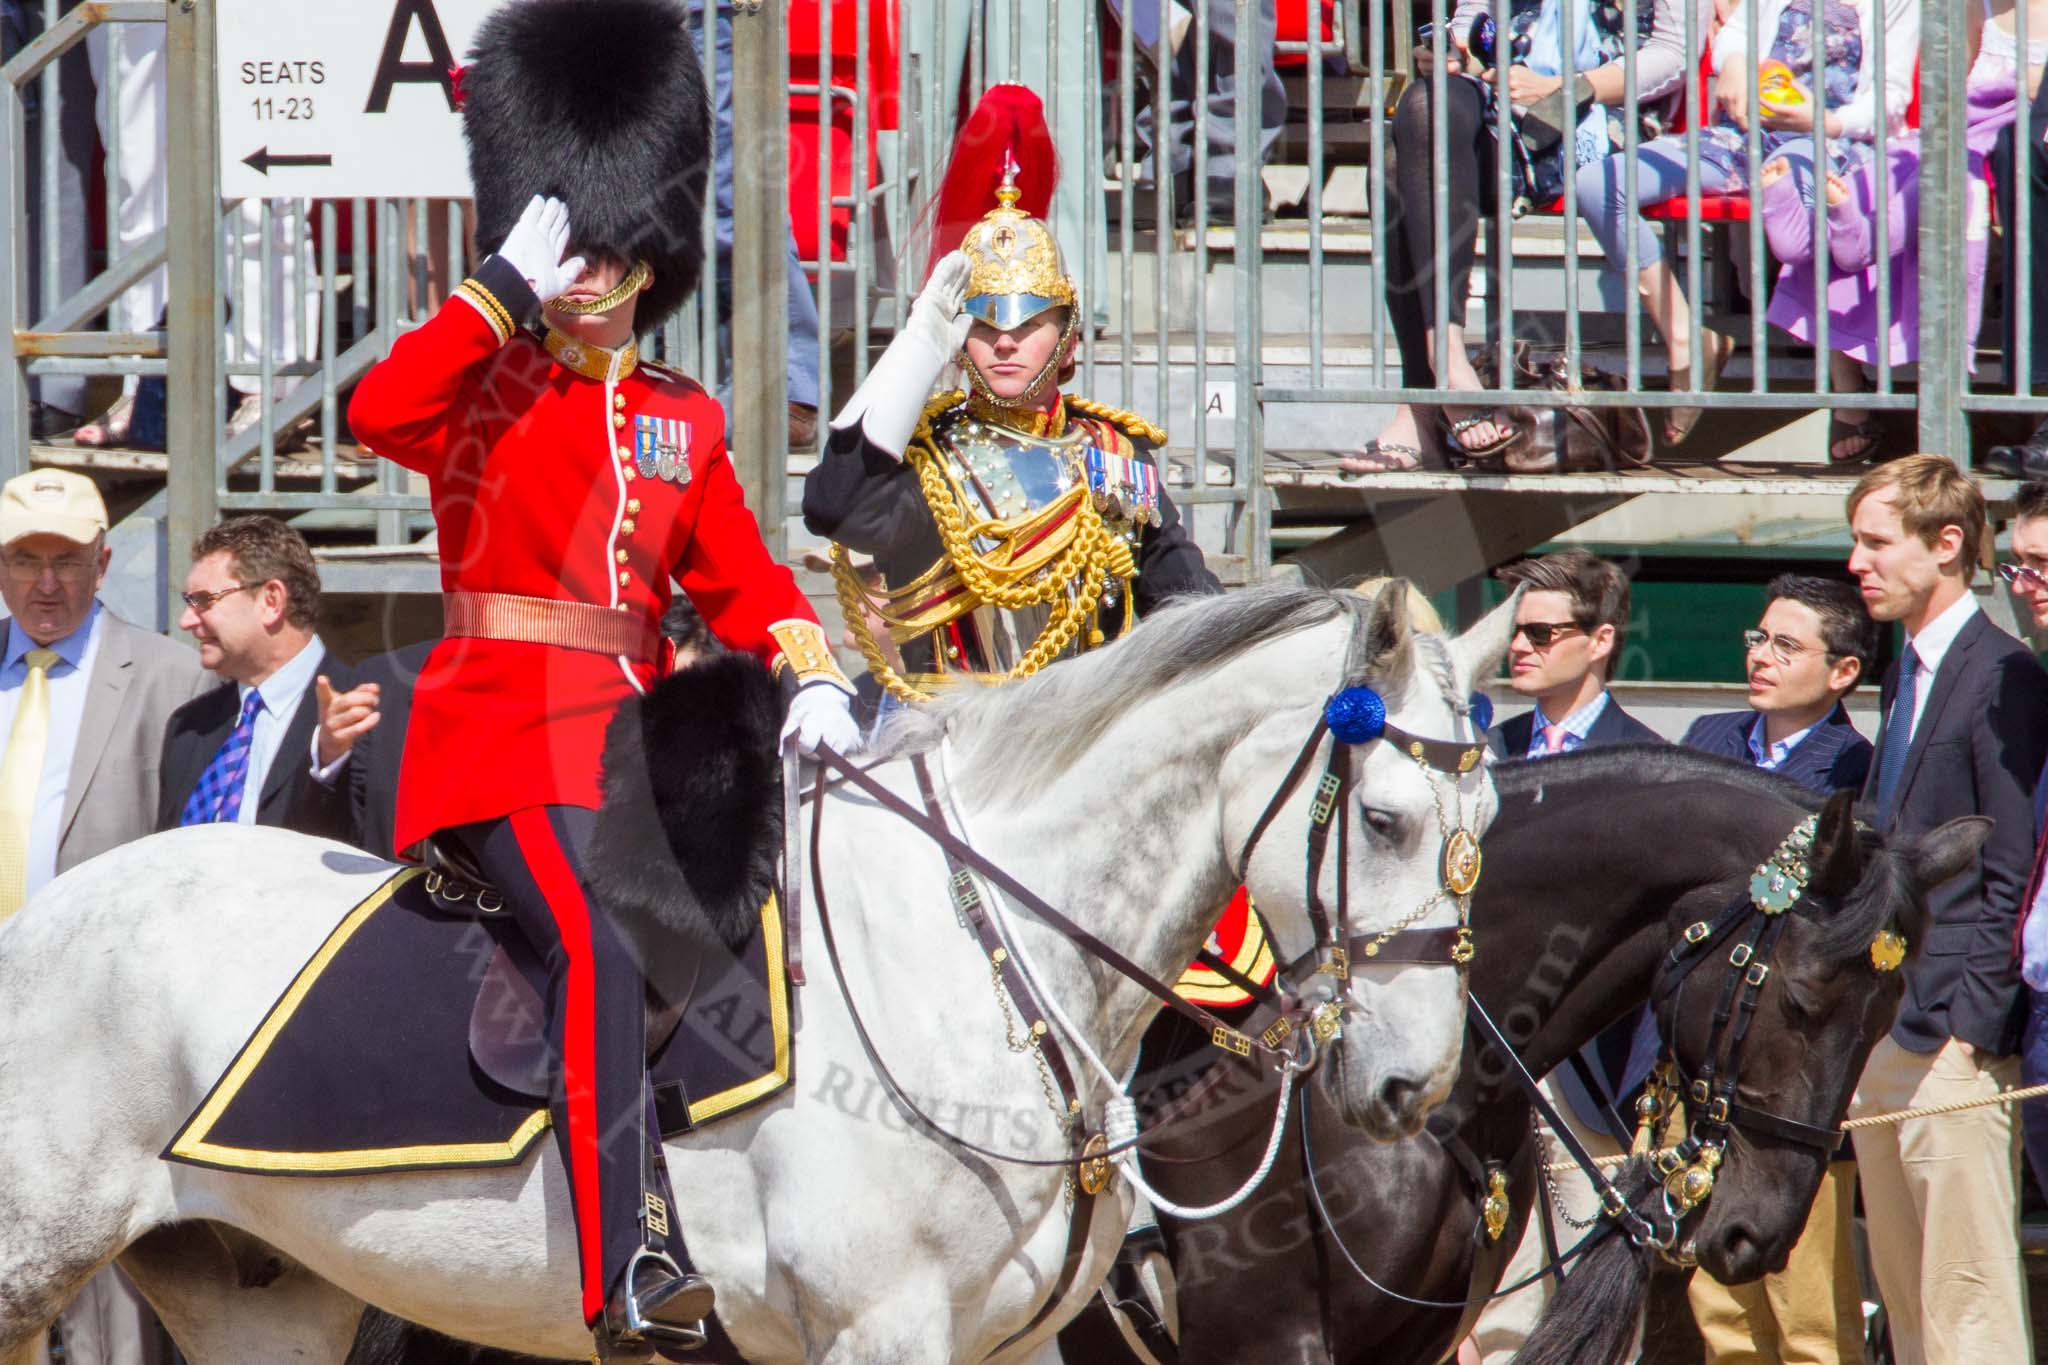 The Colonel's Review 2013.
Horse Guards Parade, Westminster,
London SW1,

United Kingdom,
on 08 June 2013 at 10:59, image #277